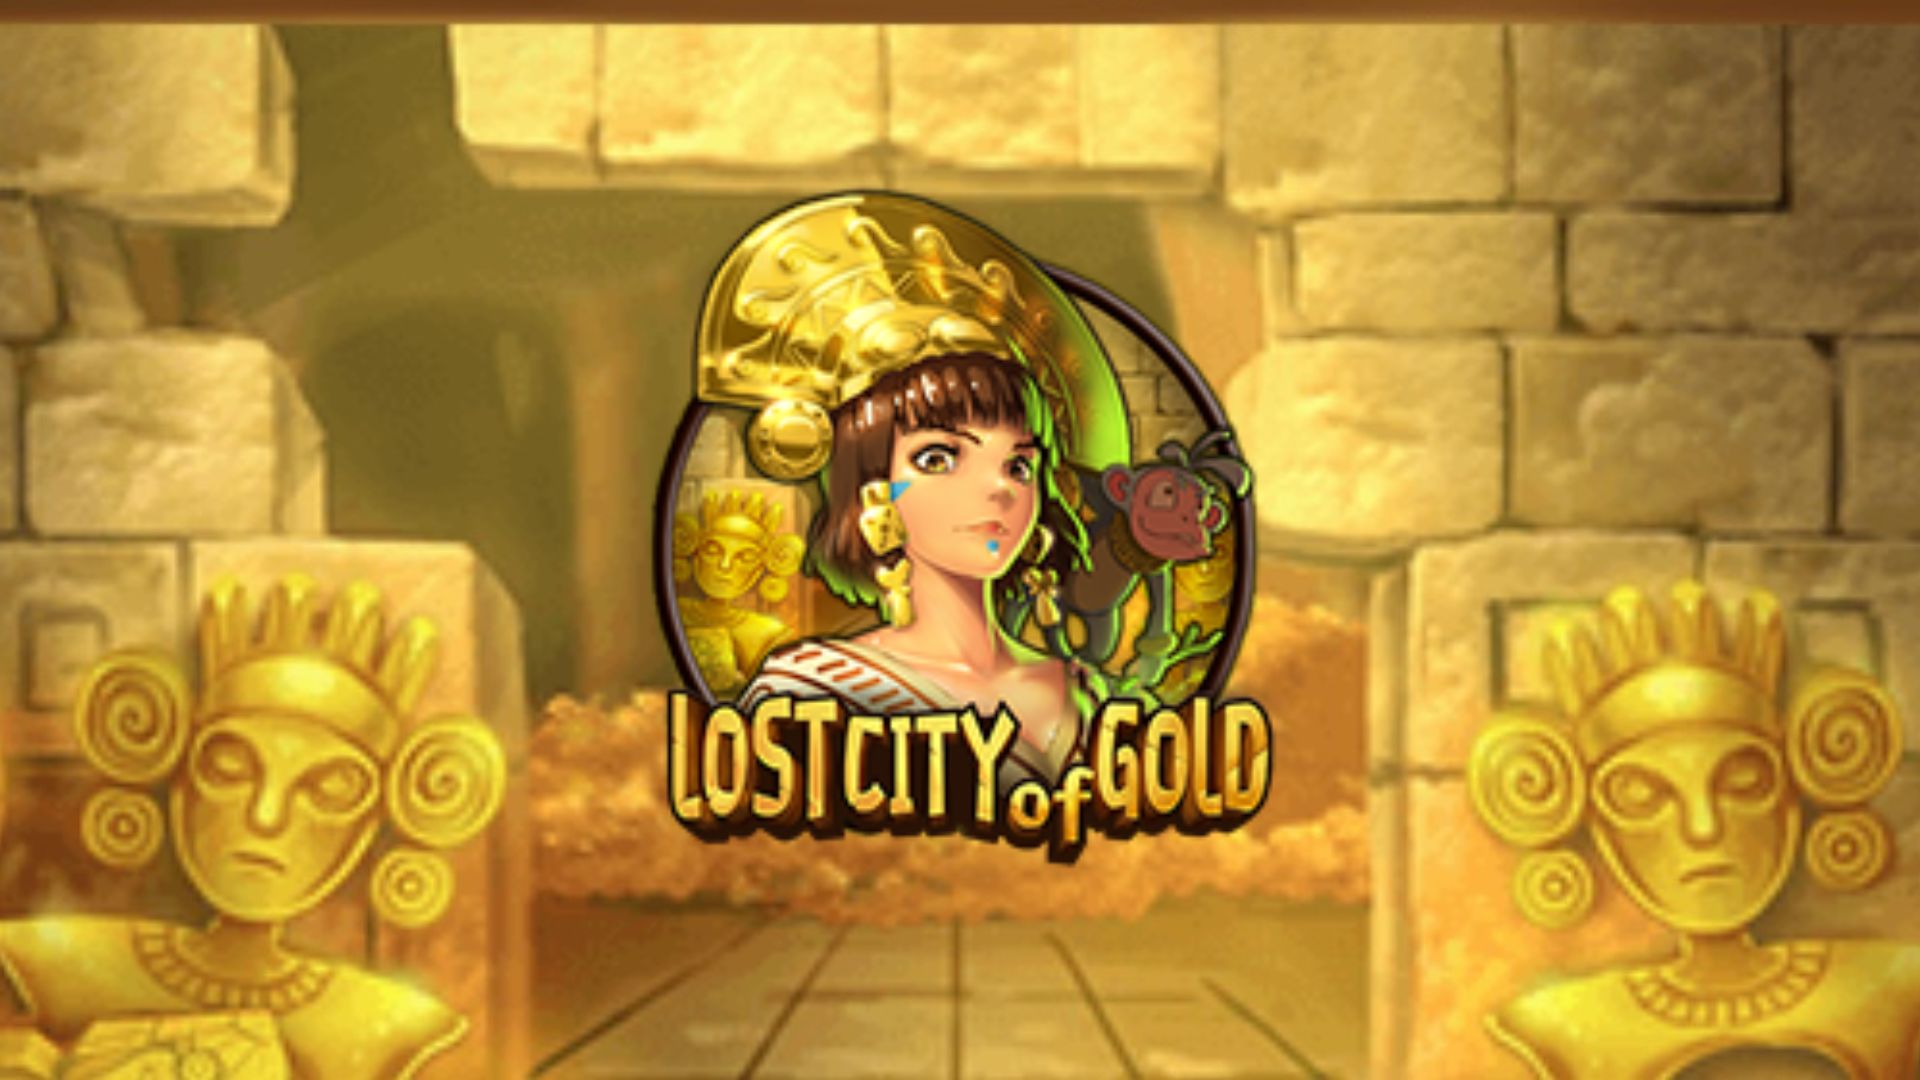 game slot online lost city of gold